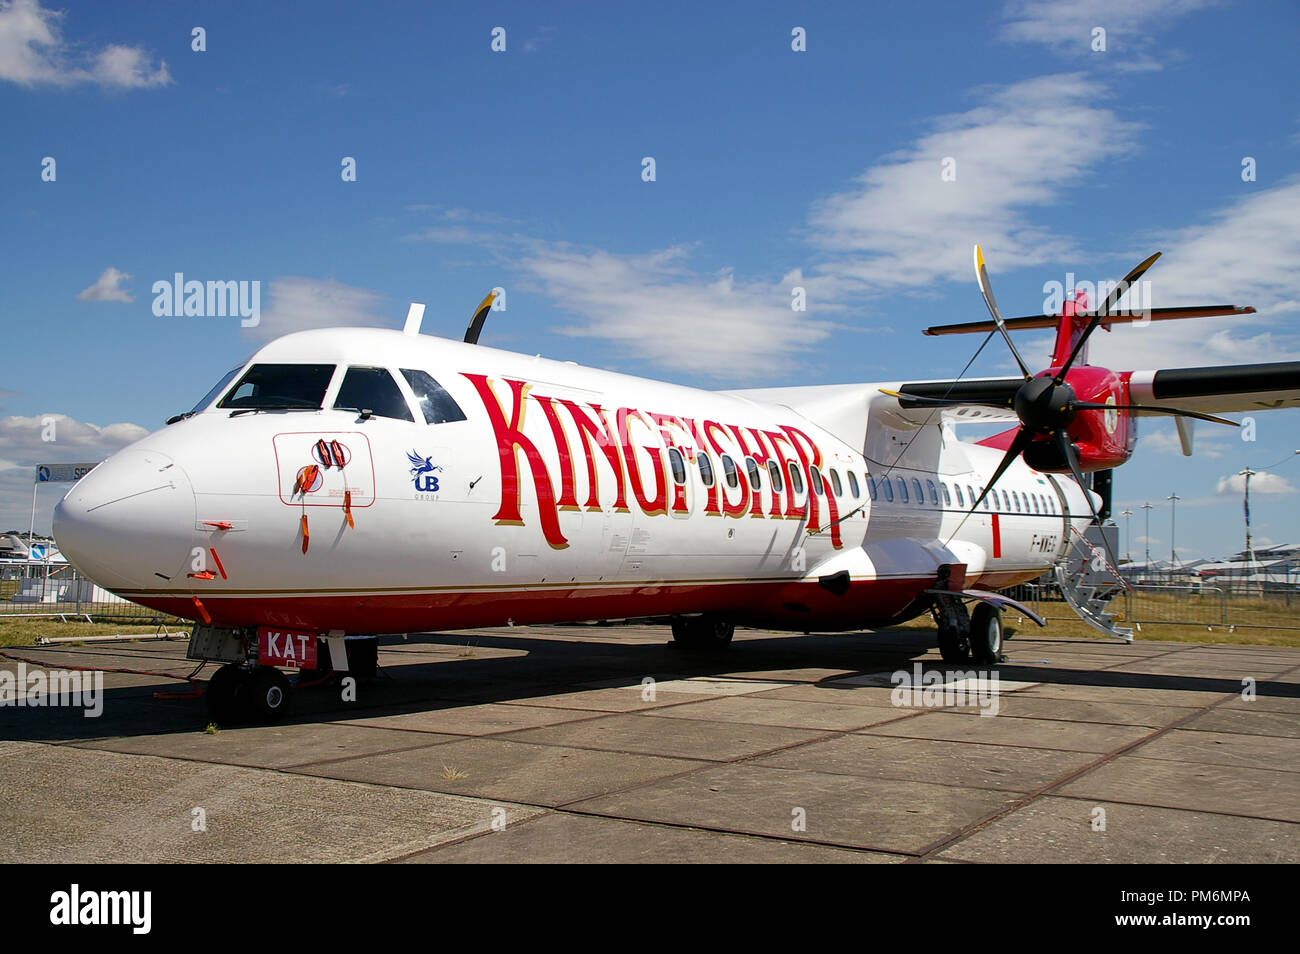 Kingfisher Airlines ATR72 ATR 72 plane at Farnborough International Airshow. F-WWEG airliner. Indian airline. Space for copy Stock Photo